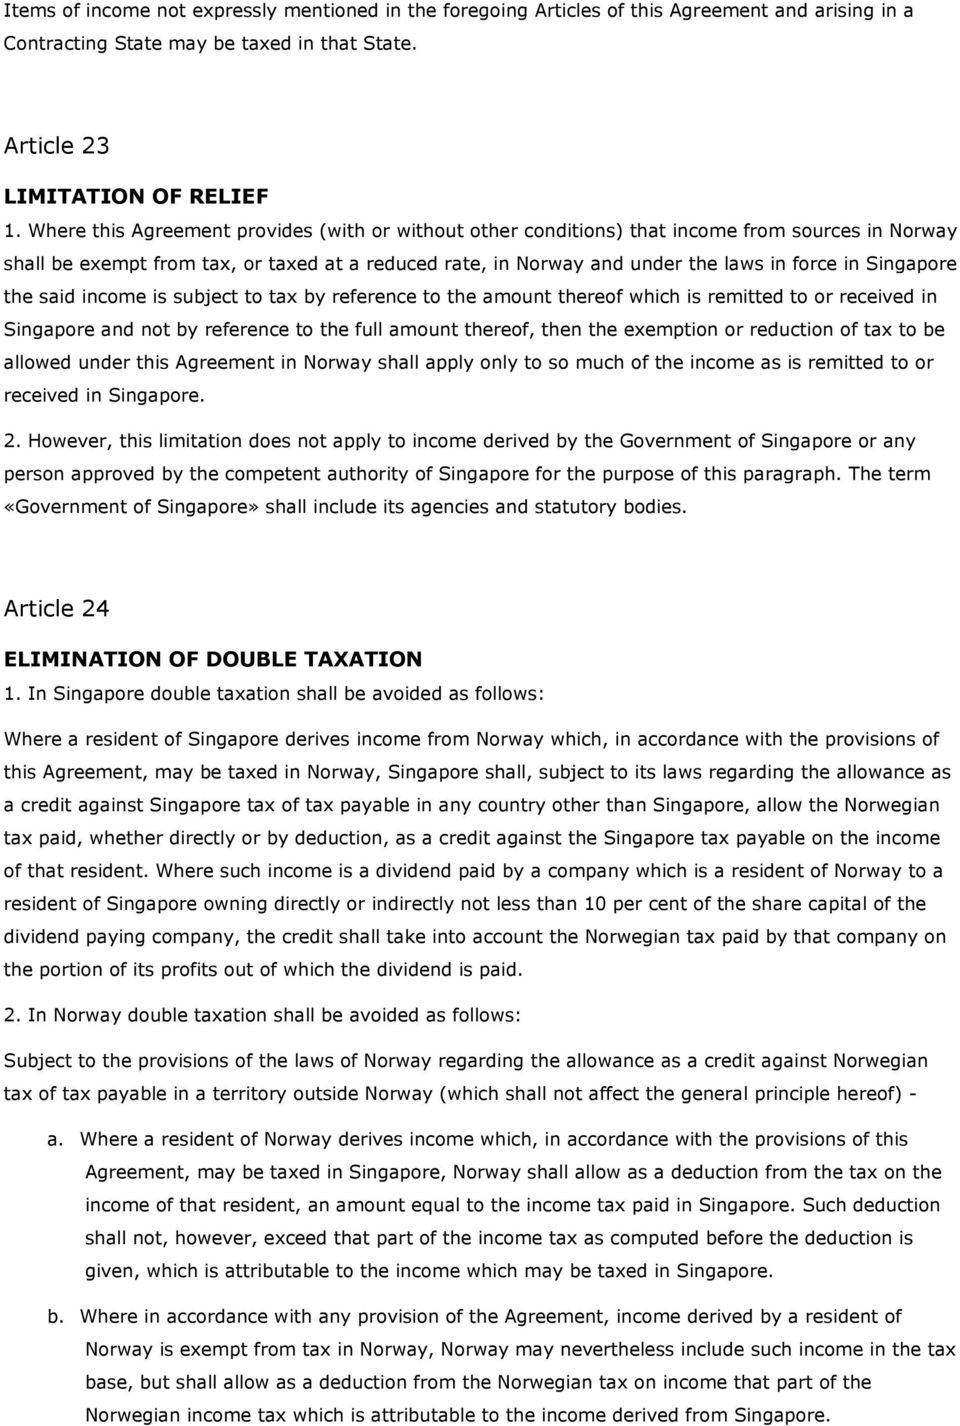 Singapore the said income is subject to tax by reference to the amount thereof which is remitted to or received in Singapore and not by reference to the full amount thereof, then the exemption or